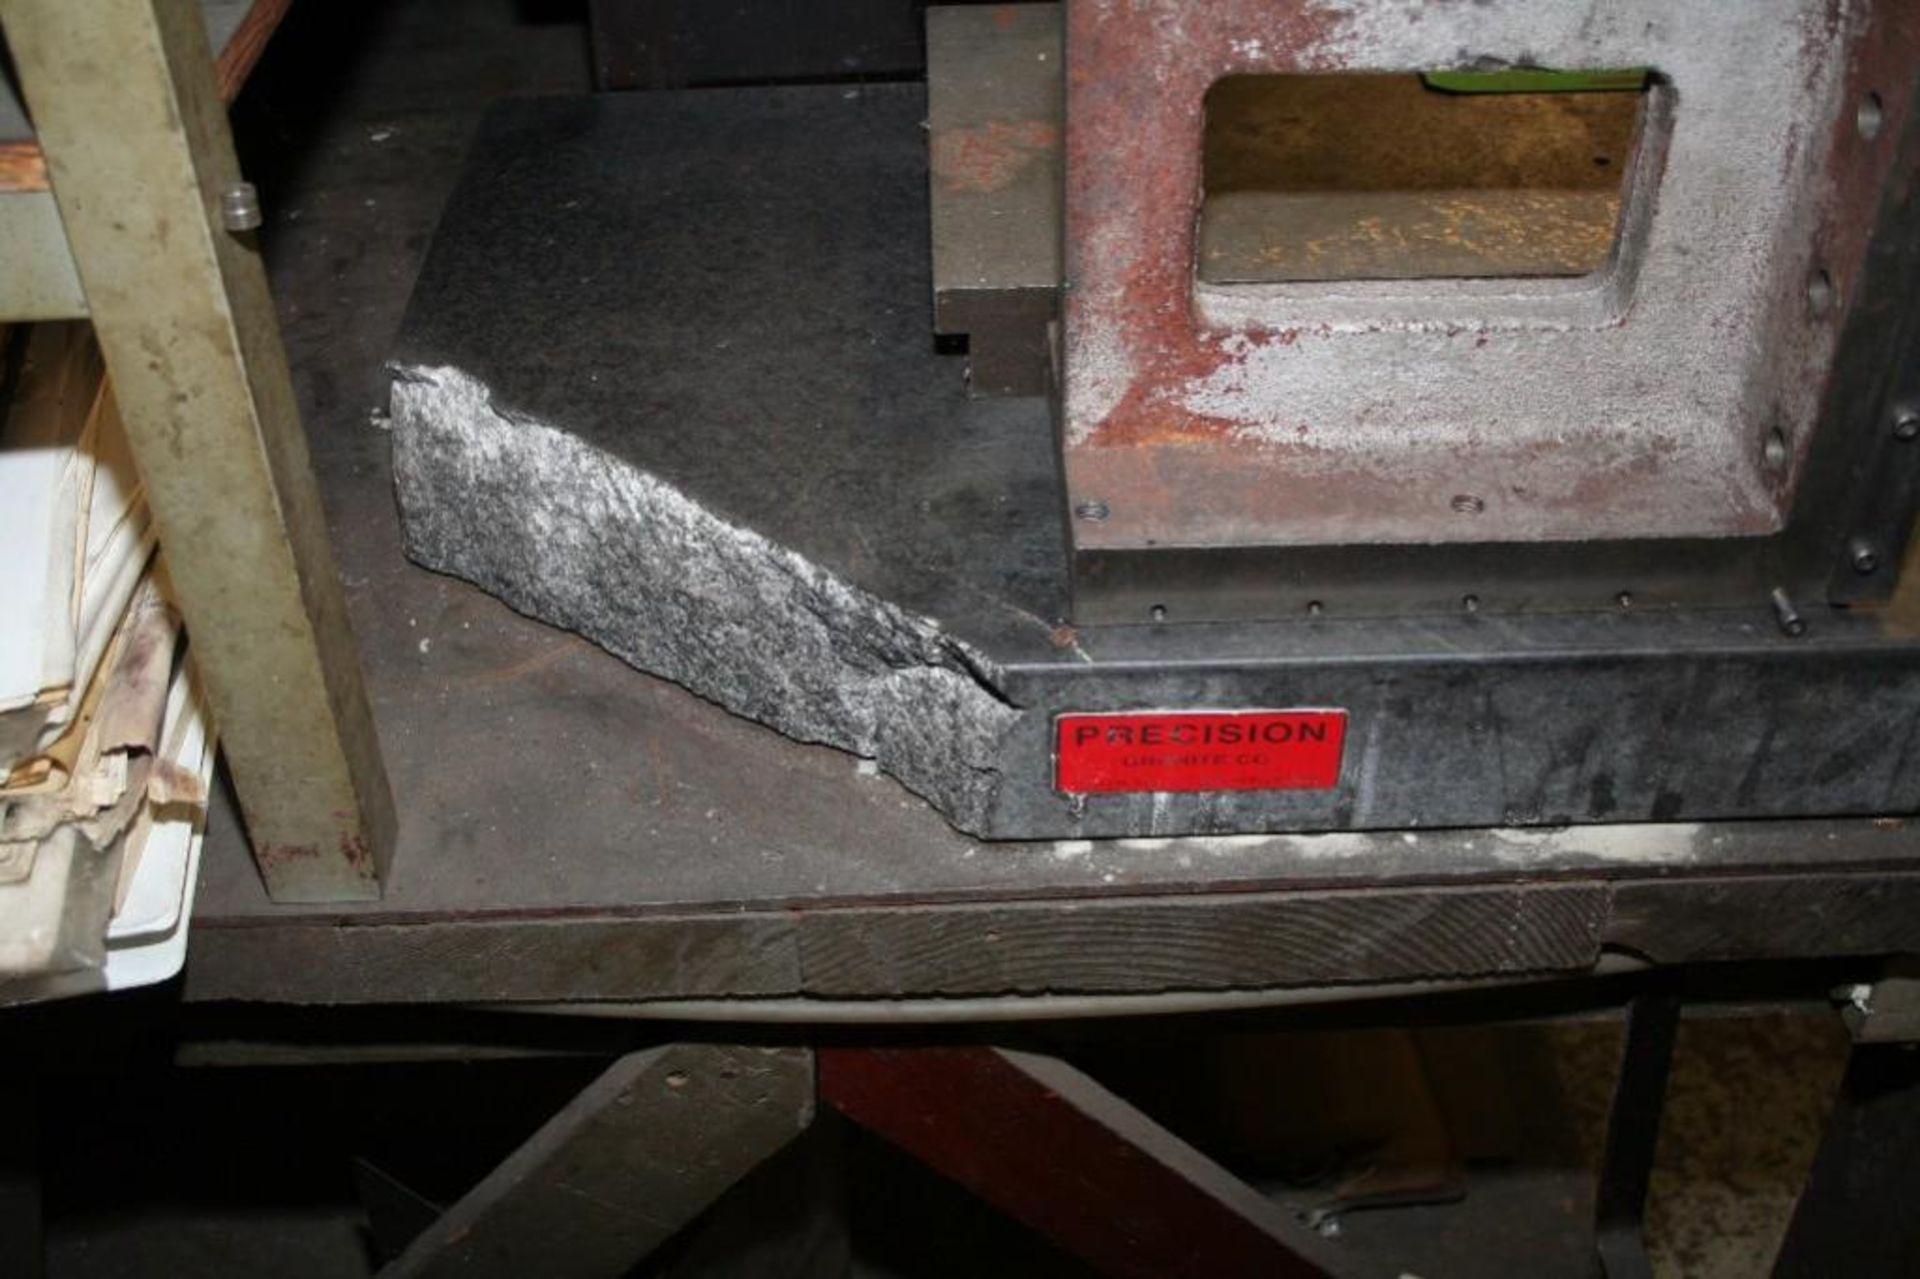 Steel Plate 11" x 15", Angle Plate, Granite Plate with Broken Corner 18" x 24 " x 3" - Image 2 of 2